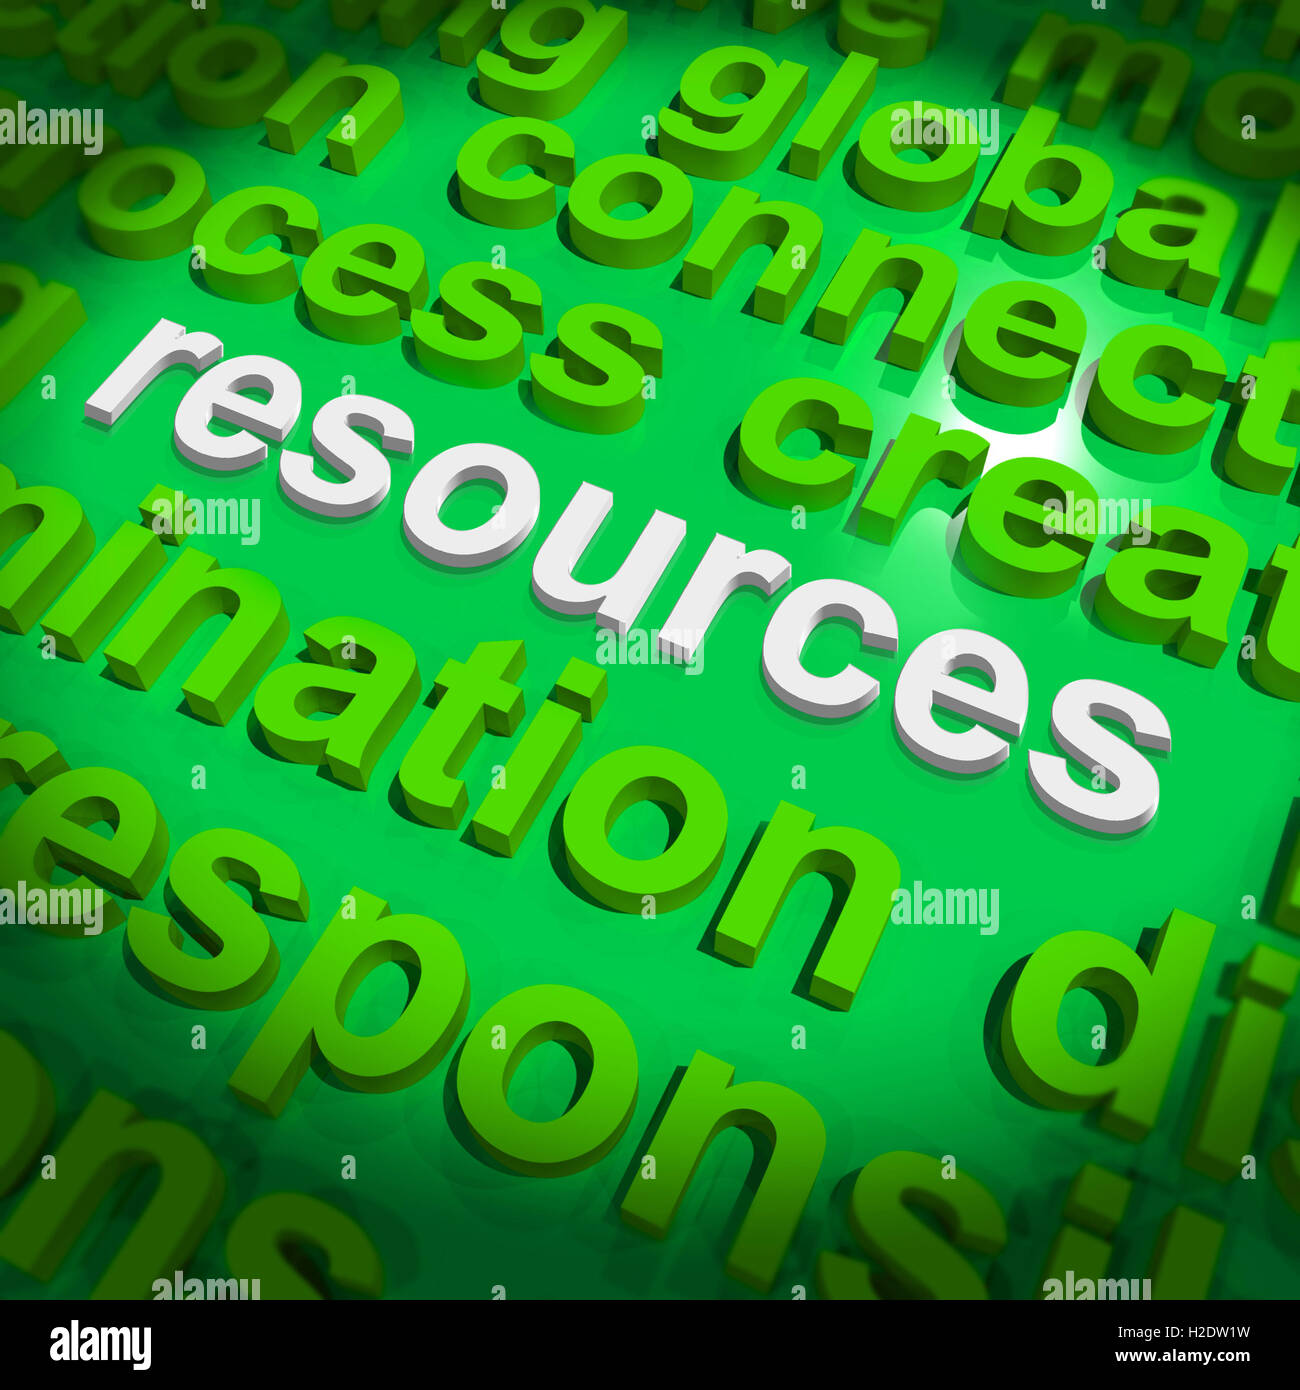 Resources Word Cloud Shows Assets Human Financial Input Stock Photo